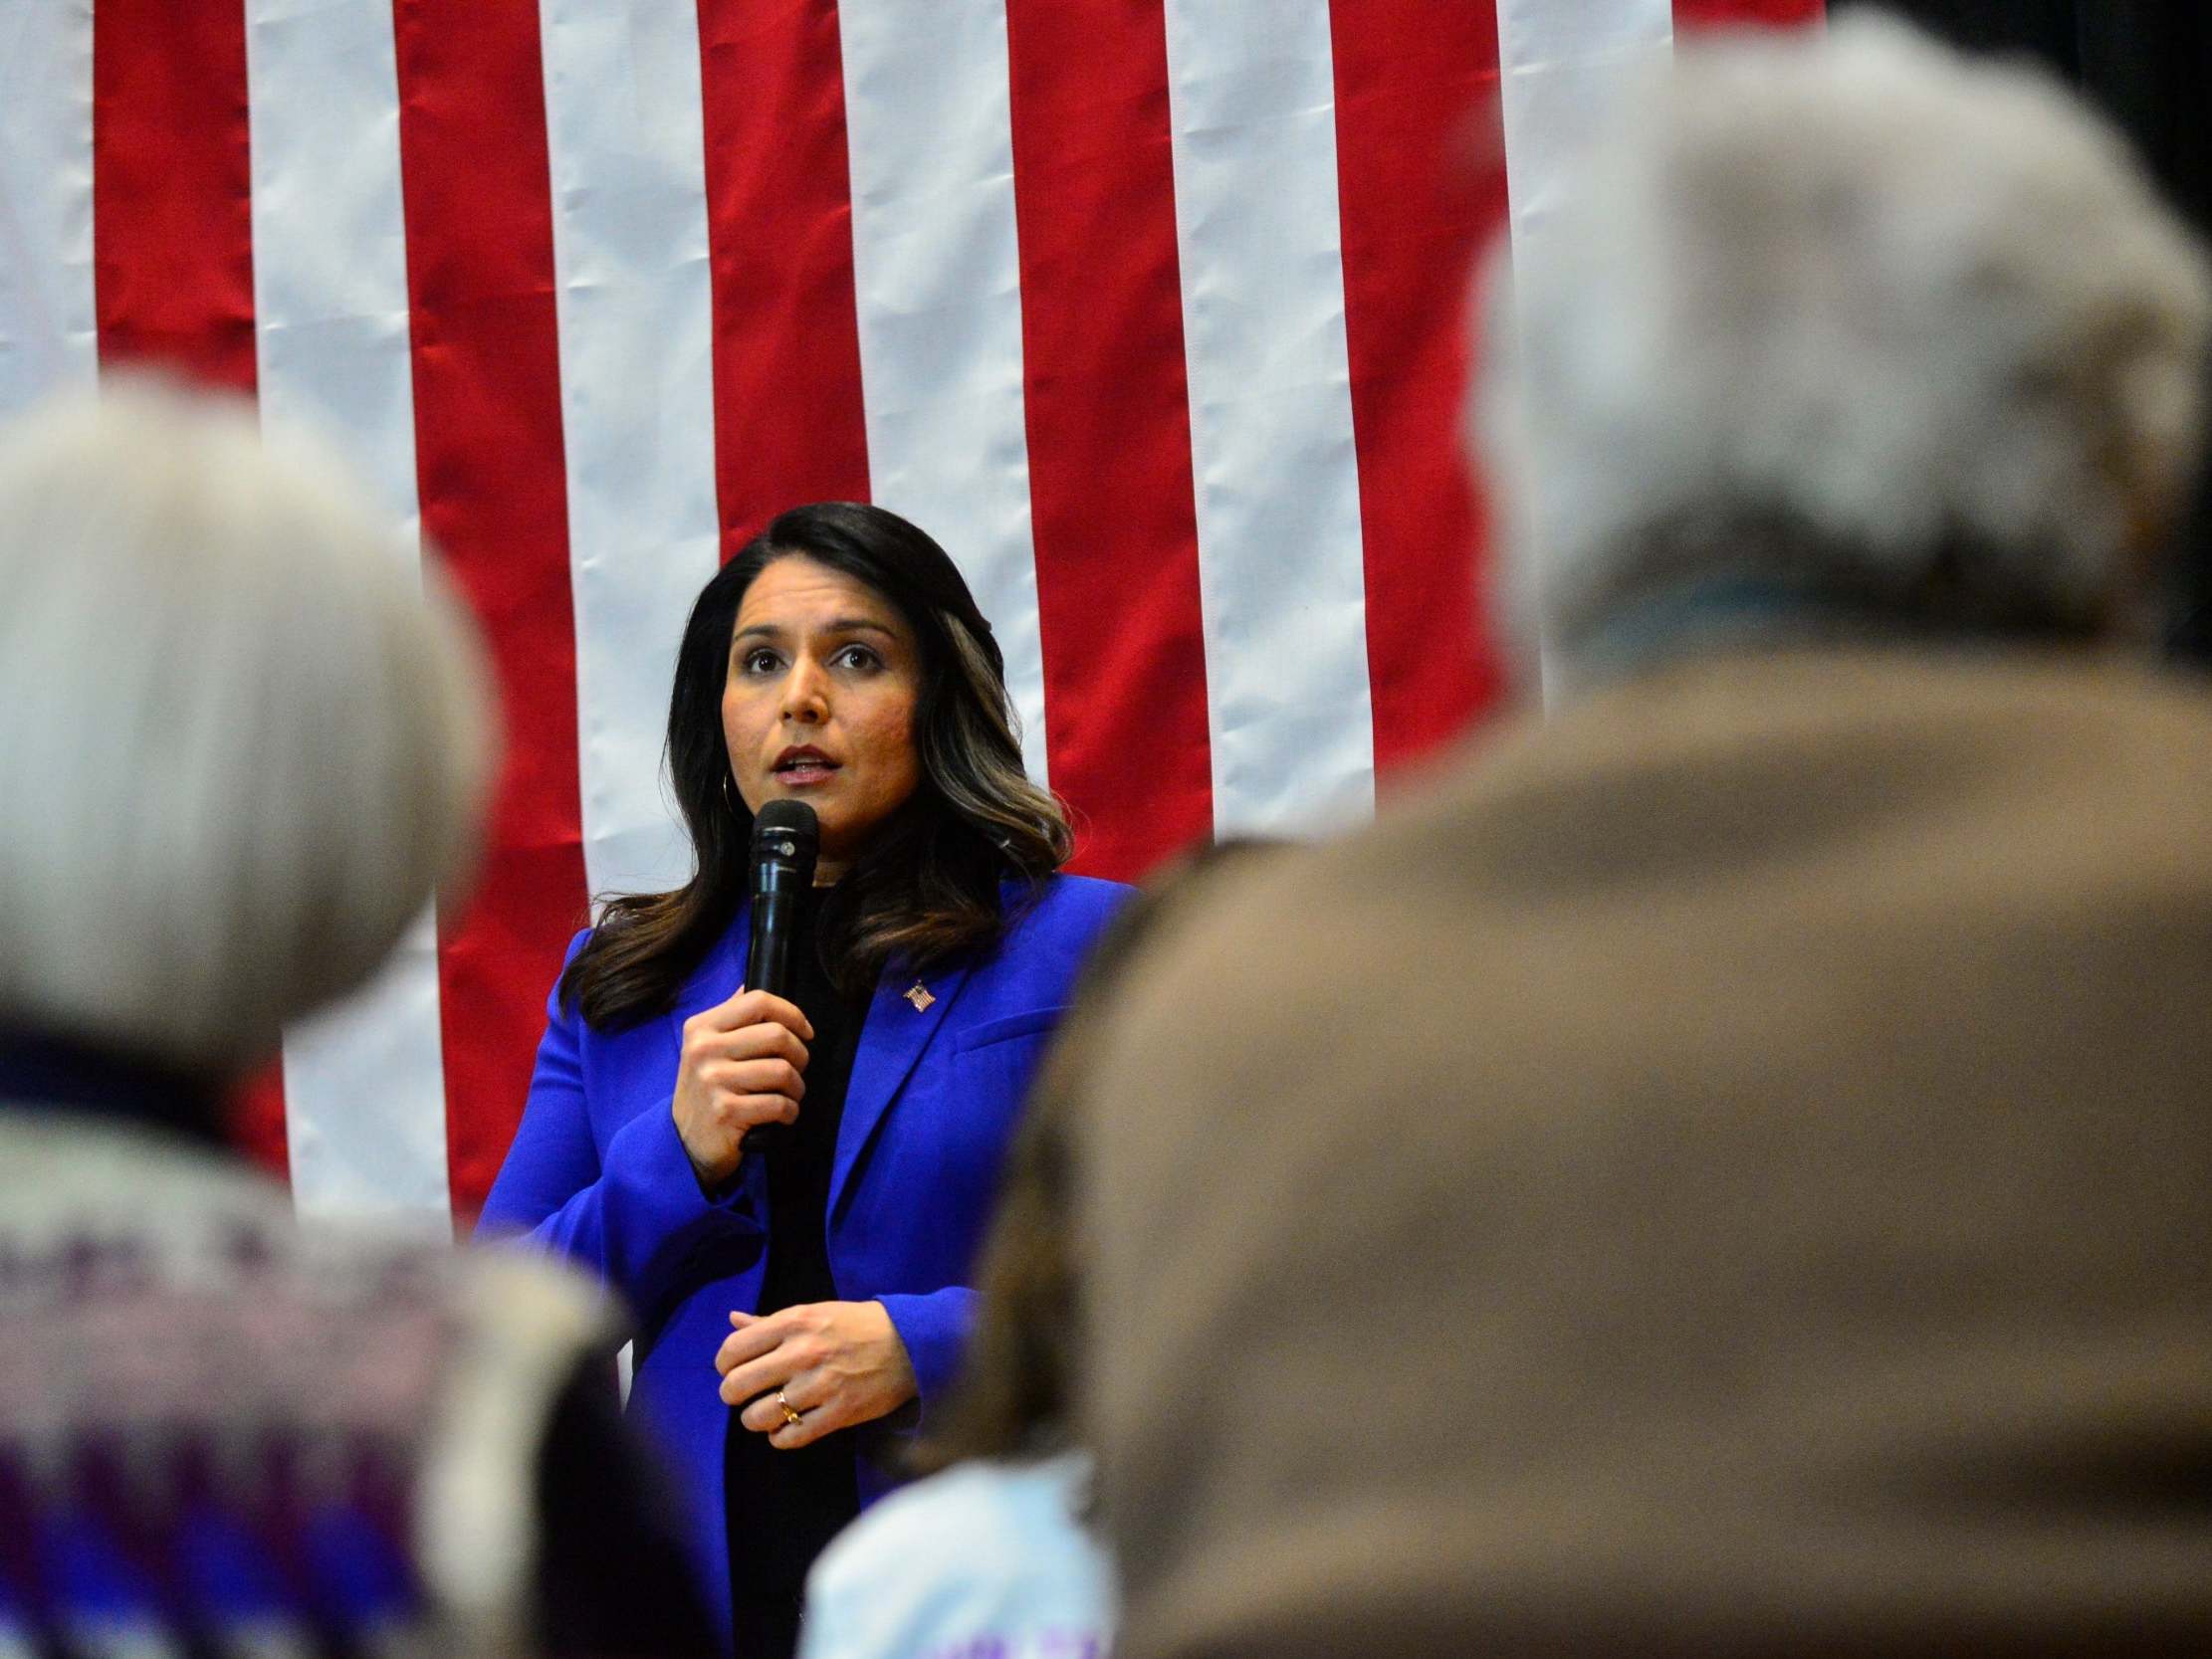 Tulsi Gabbard's last stand? In New Hampshire, the Hawaii congresswoman is hoping to shock the national narrative